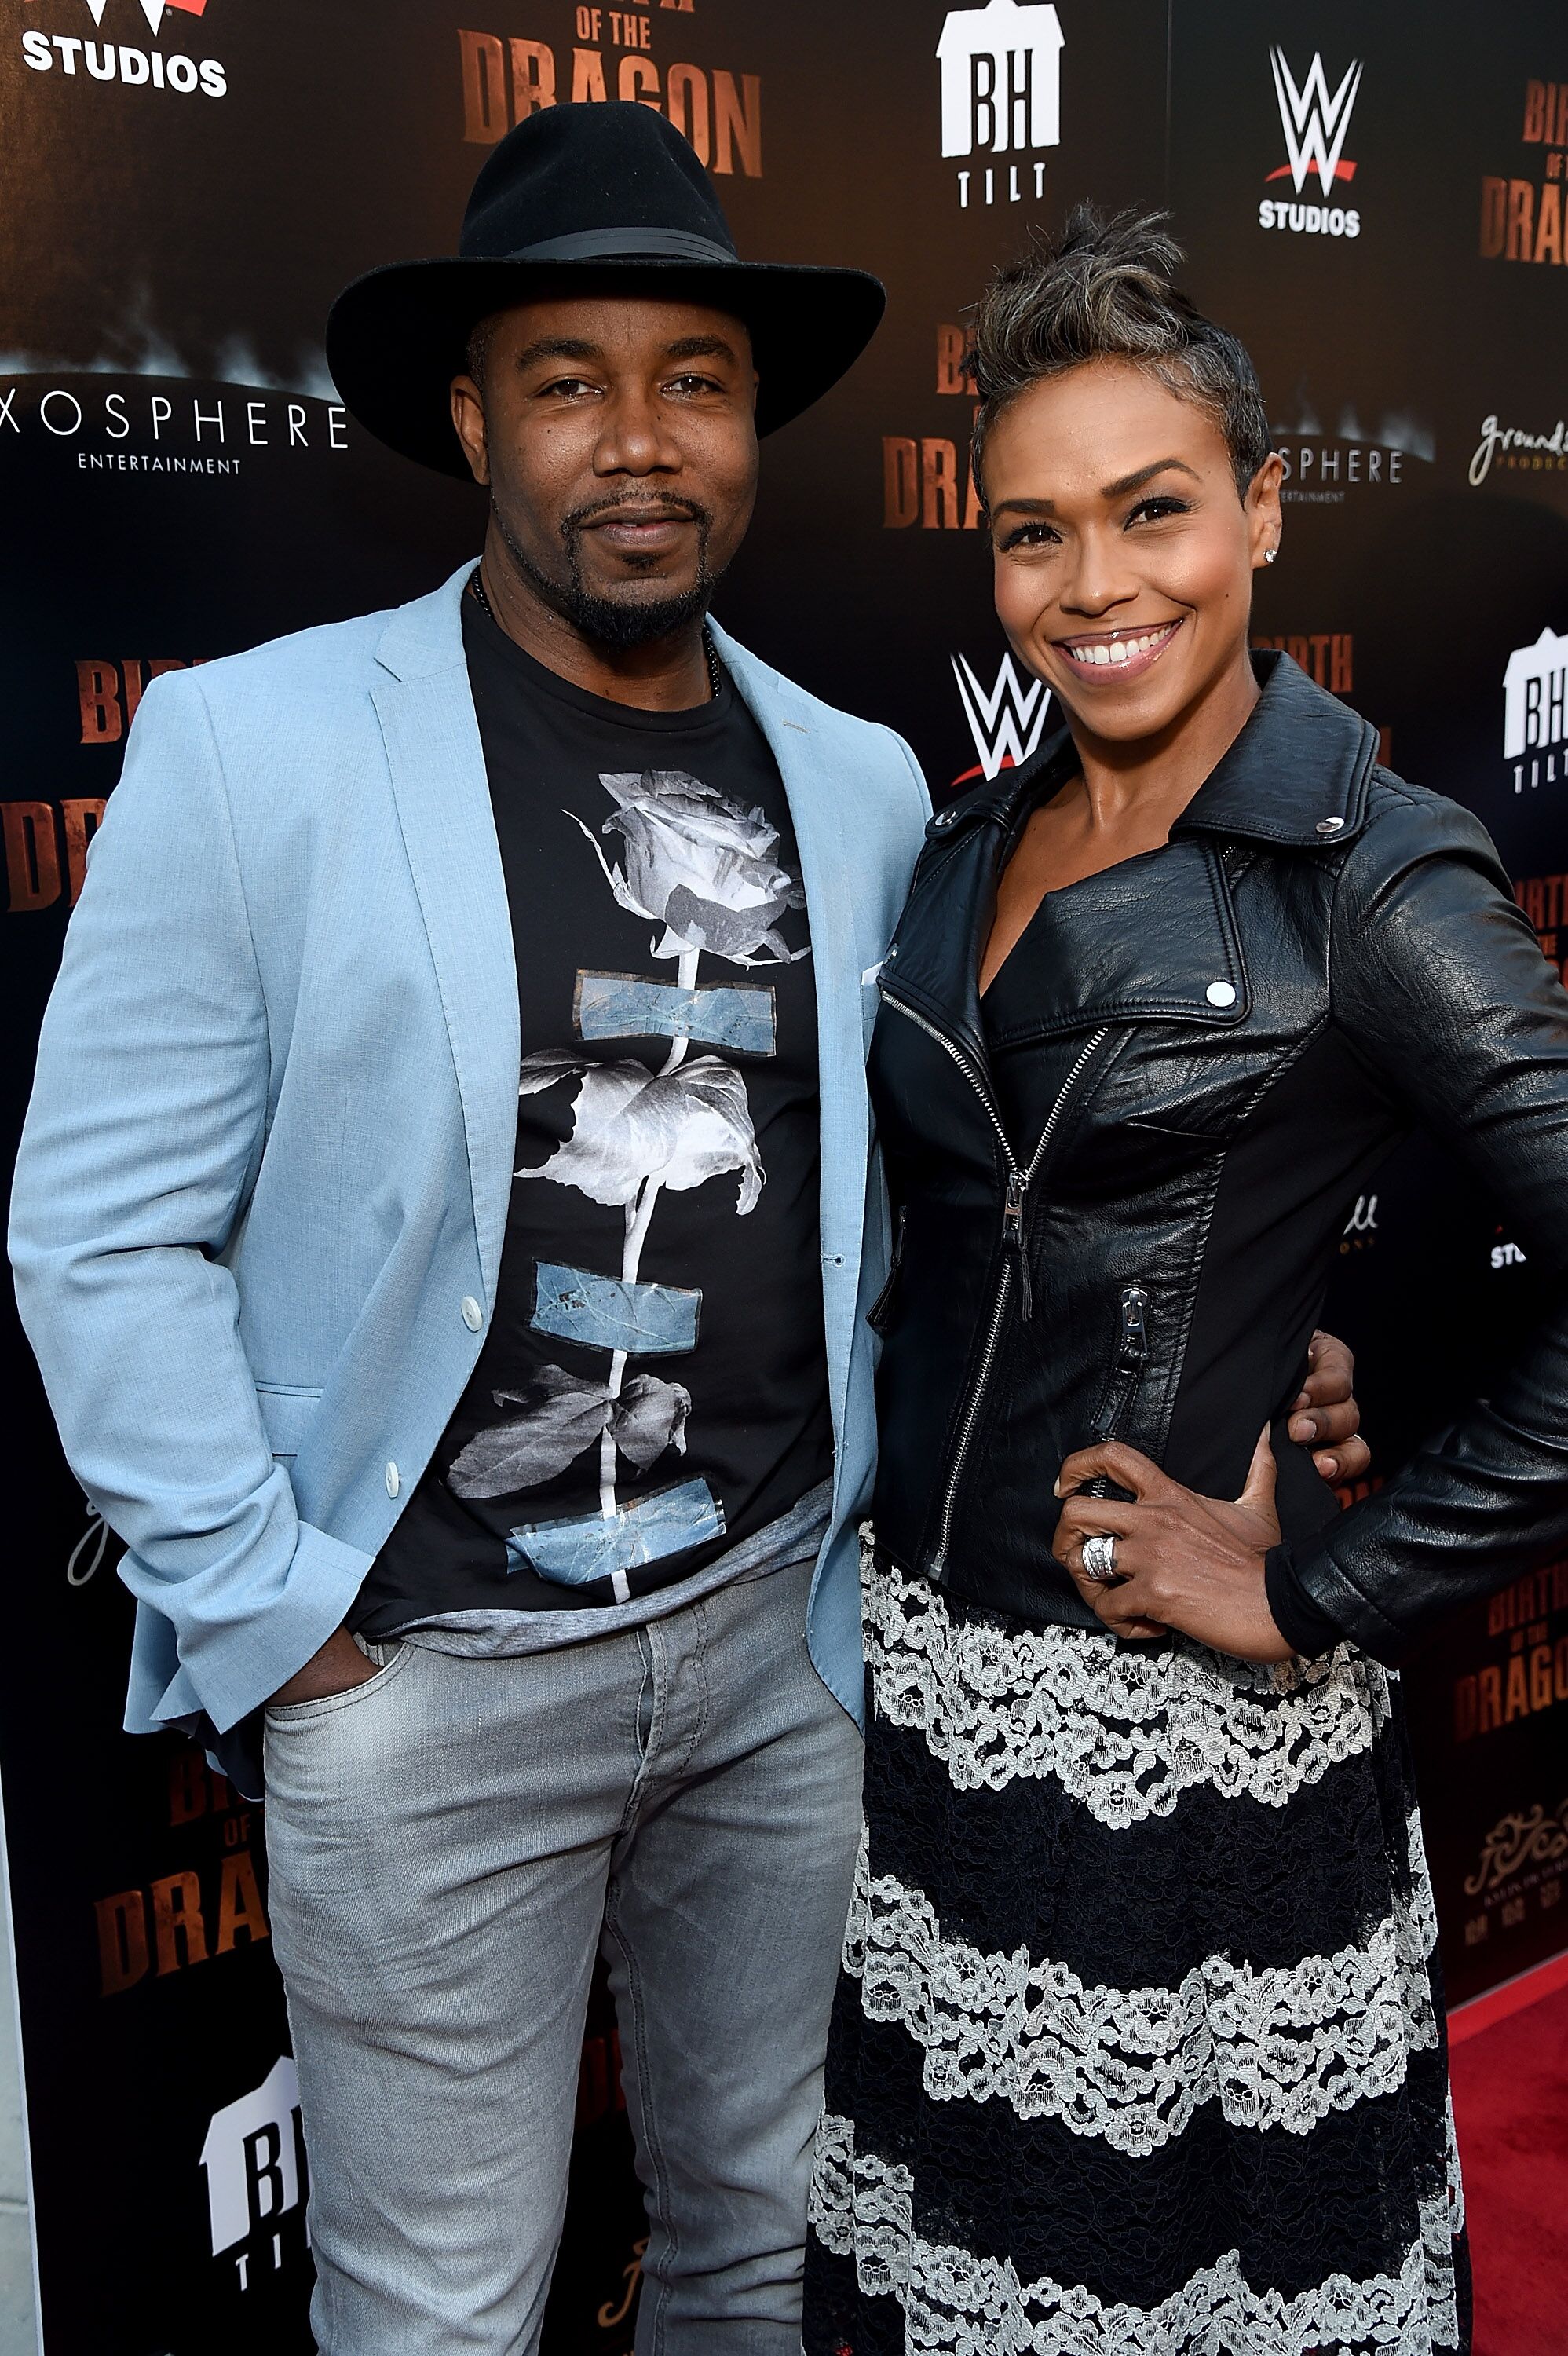 Actor michael jai white at the premiere of "The Mantle of The Black Dragon" with his wife  Gillian Iliana Waters/ Source: Getty Images